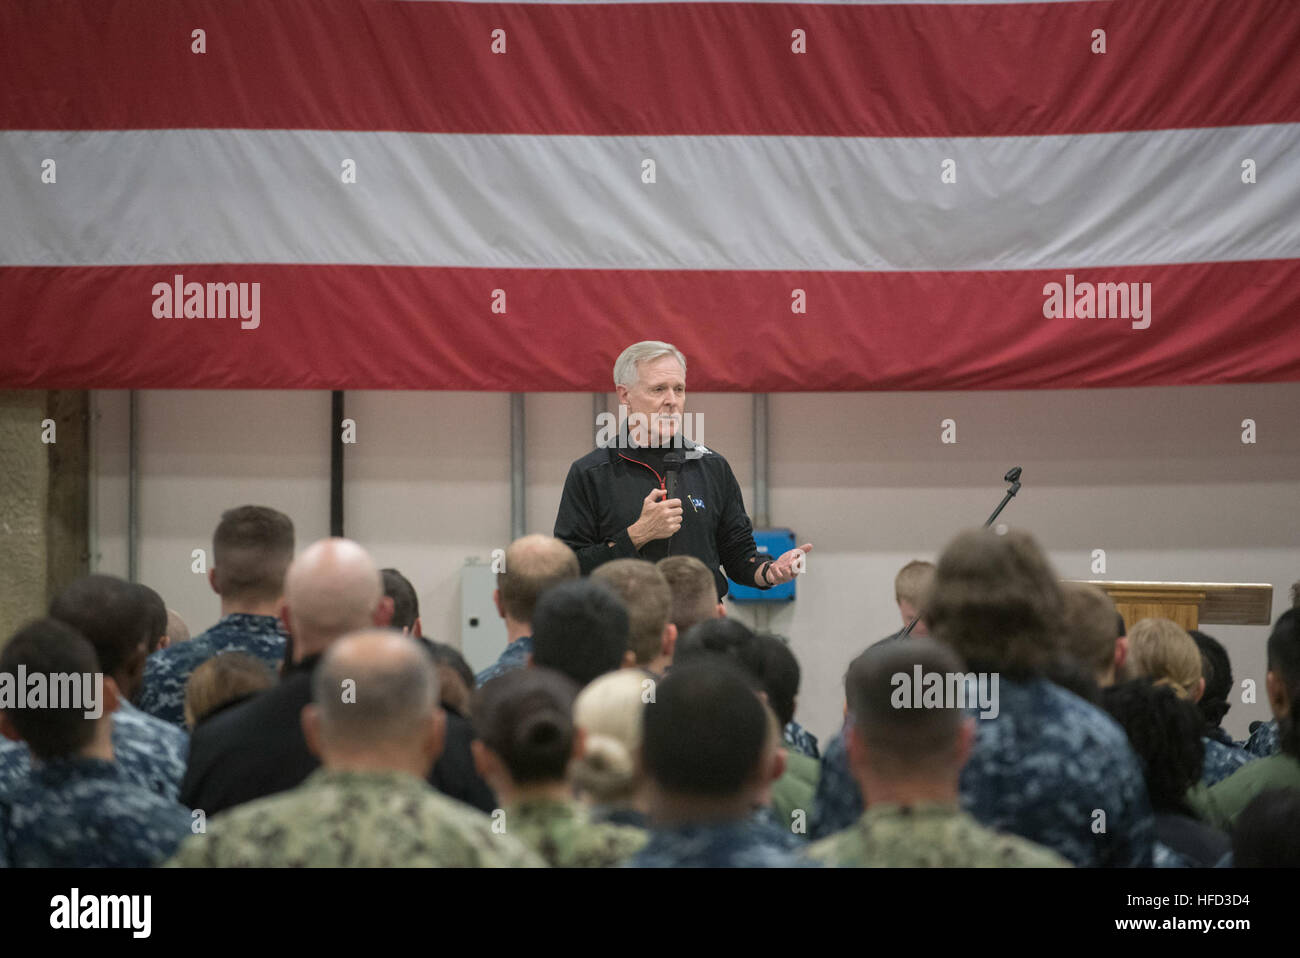 SIGONELLA, Italy (Nov. 28, 2016) Secretary of the Navy (SECNAV) Ray Mabus holds an all-hands call at Naval Air Station Sigonella. Mabus is in the area as part of a multinational tour to meet with Sailors and Marines, and government and military leaders. (U.S. Navy photo by Petty Officer 1st Class Armando Gonzales/Released)161128-N-LV331-001 Join the conversation: http://www.navy.mil/viewGallery.asp http://www.facebook.com/USNavy http://www.twitter.com/USNavy http://navylive.dodlive.mil http://pinterest.com https://plus.google.com SECNAV holds an all-hands call at Naval Air Station Sigonella. ( Stock Photo